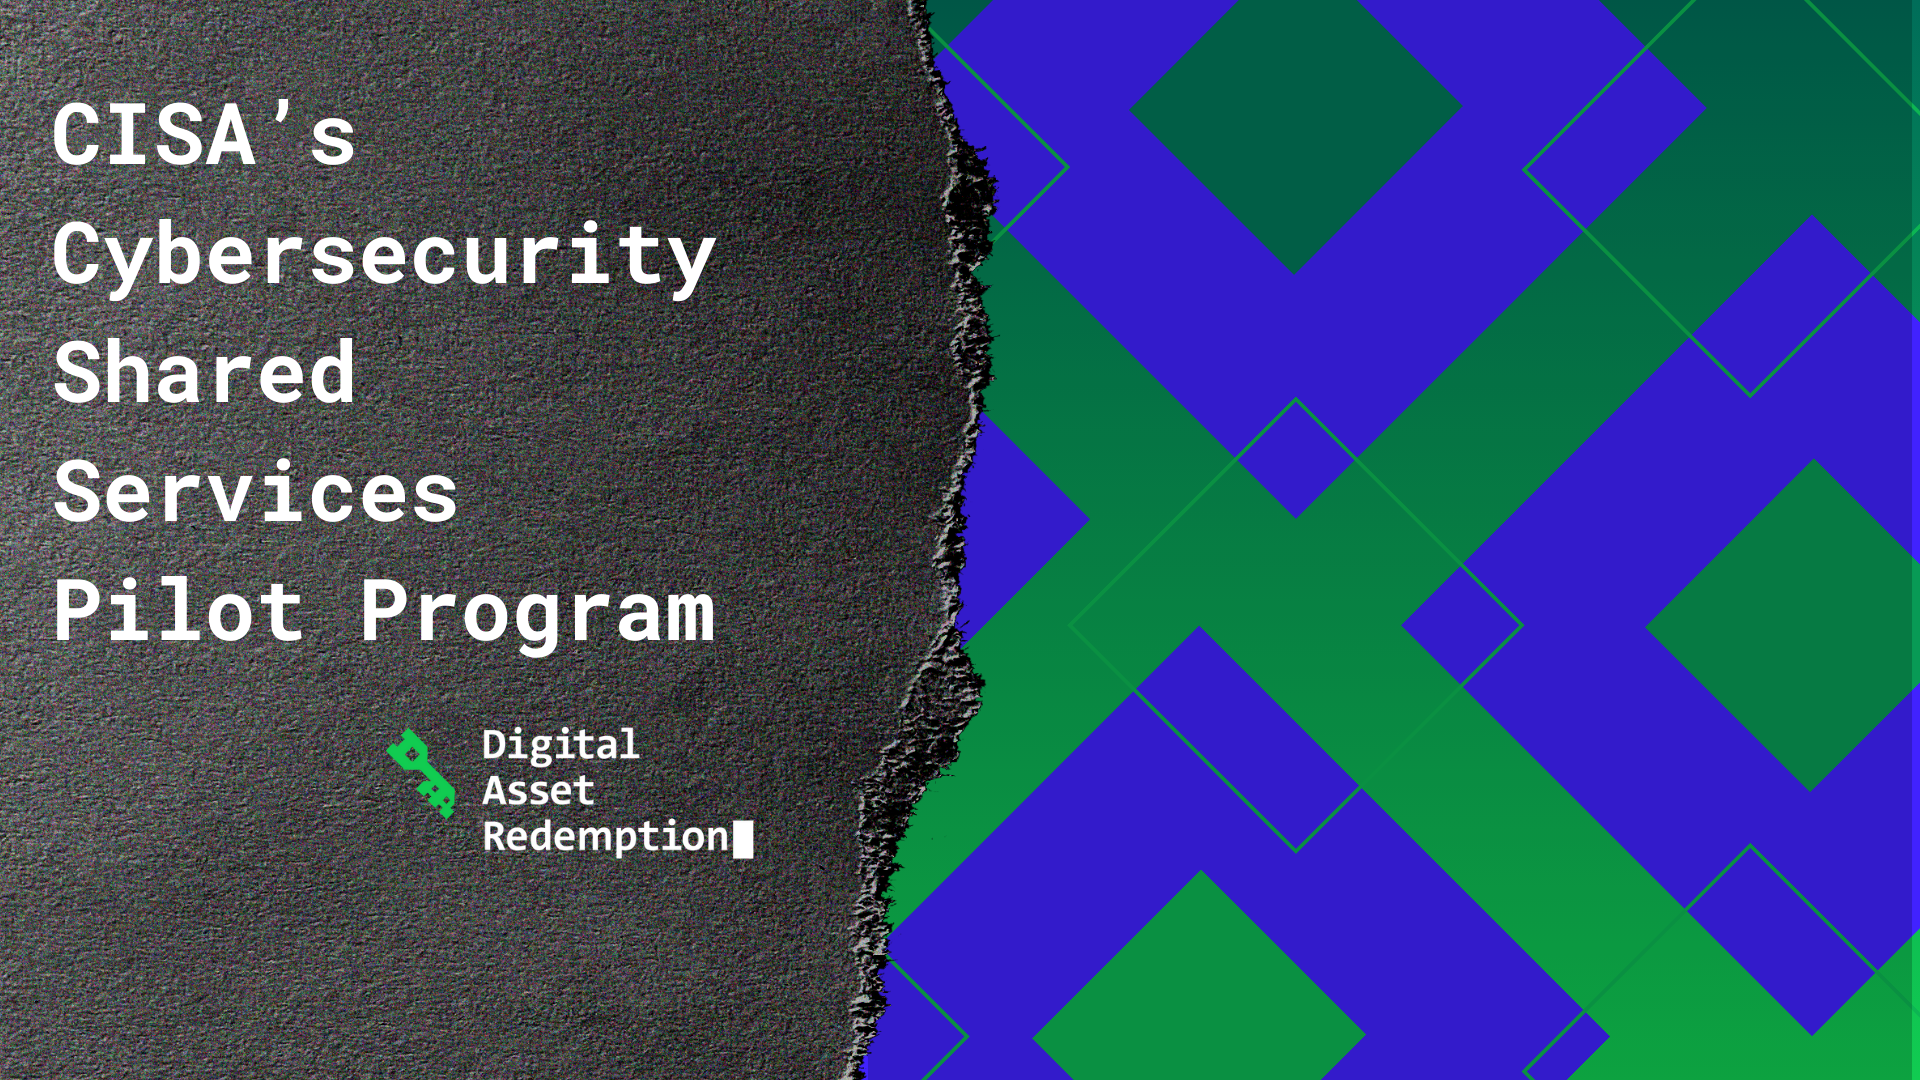 CISA’s Cybersecurity Shared Services Pilot Program (1)